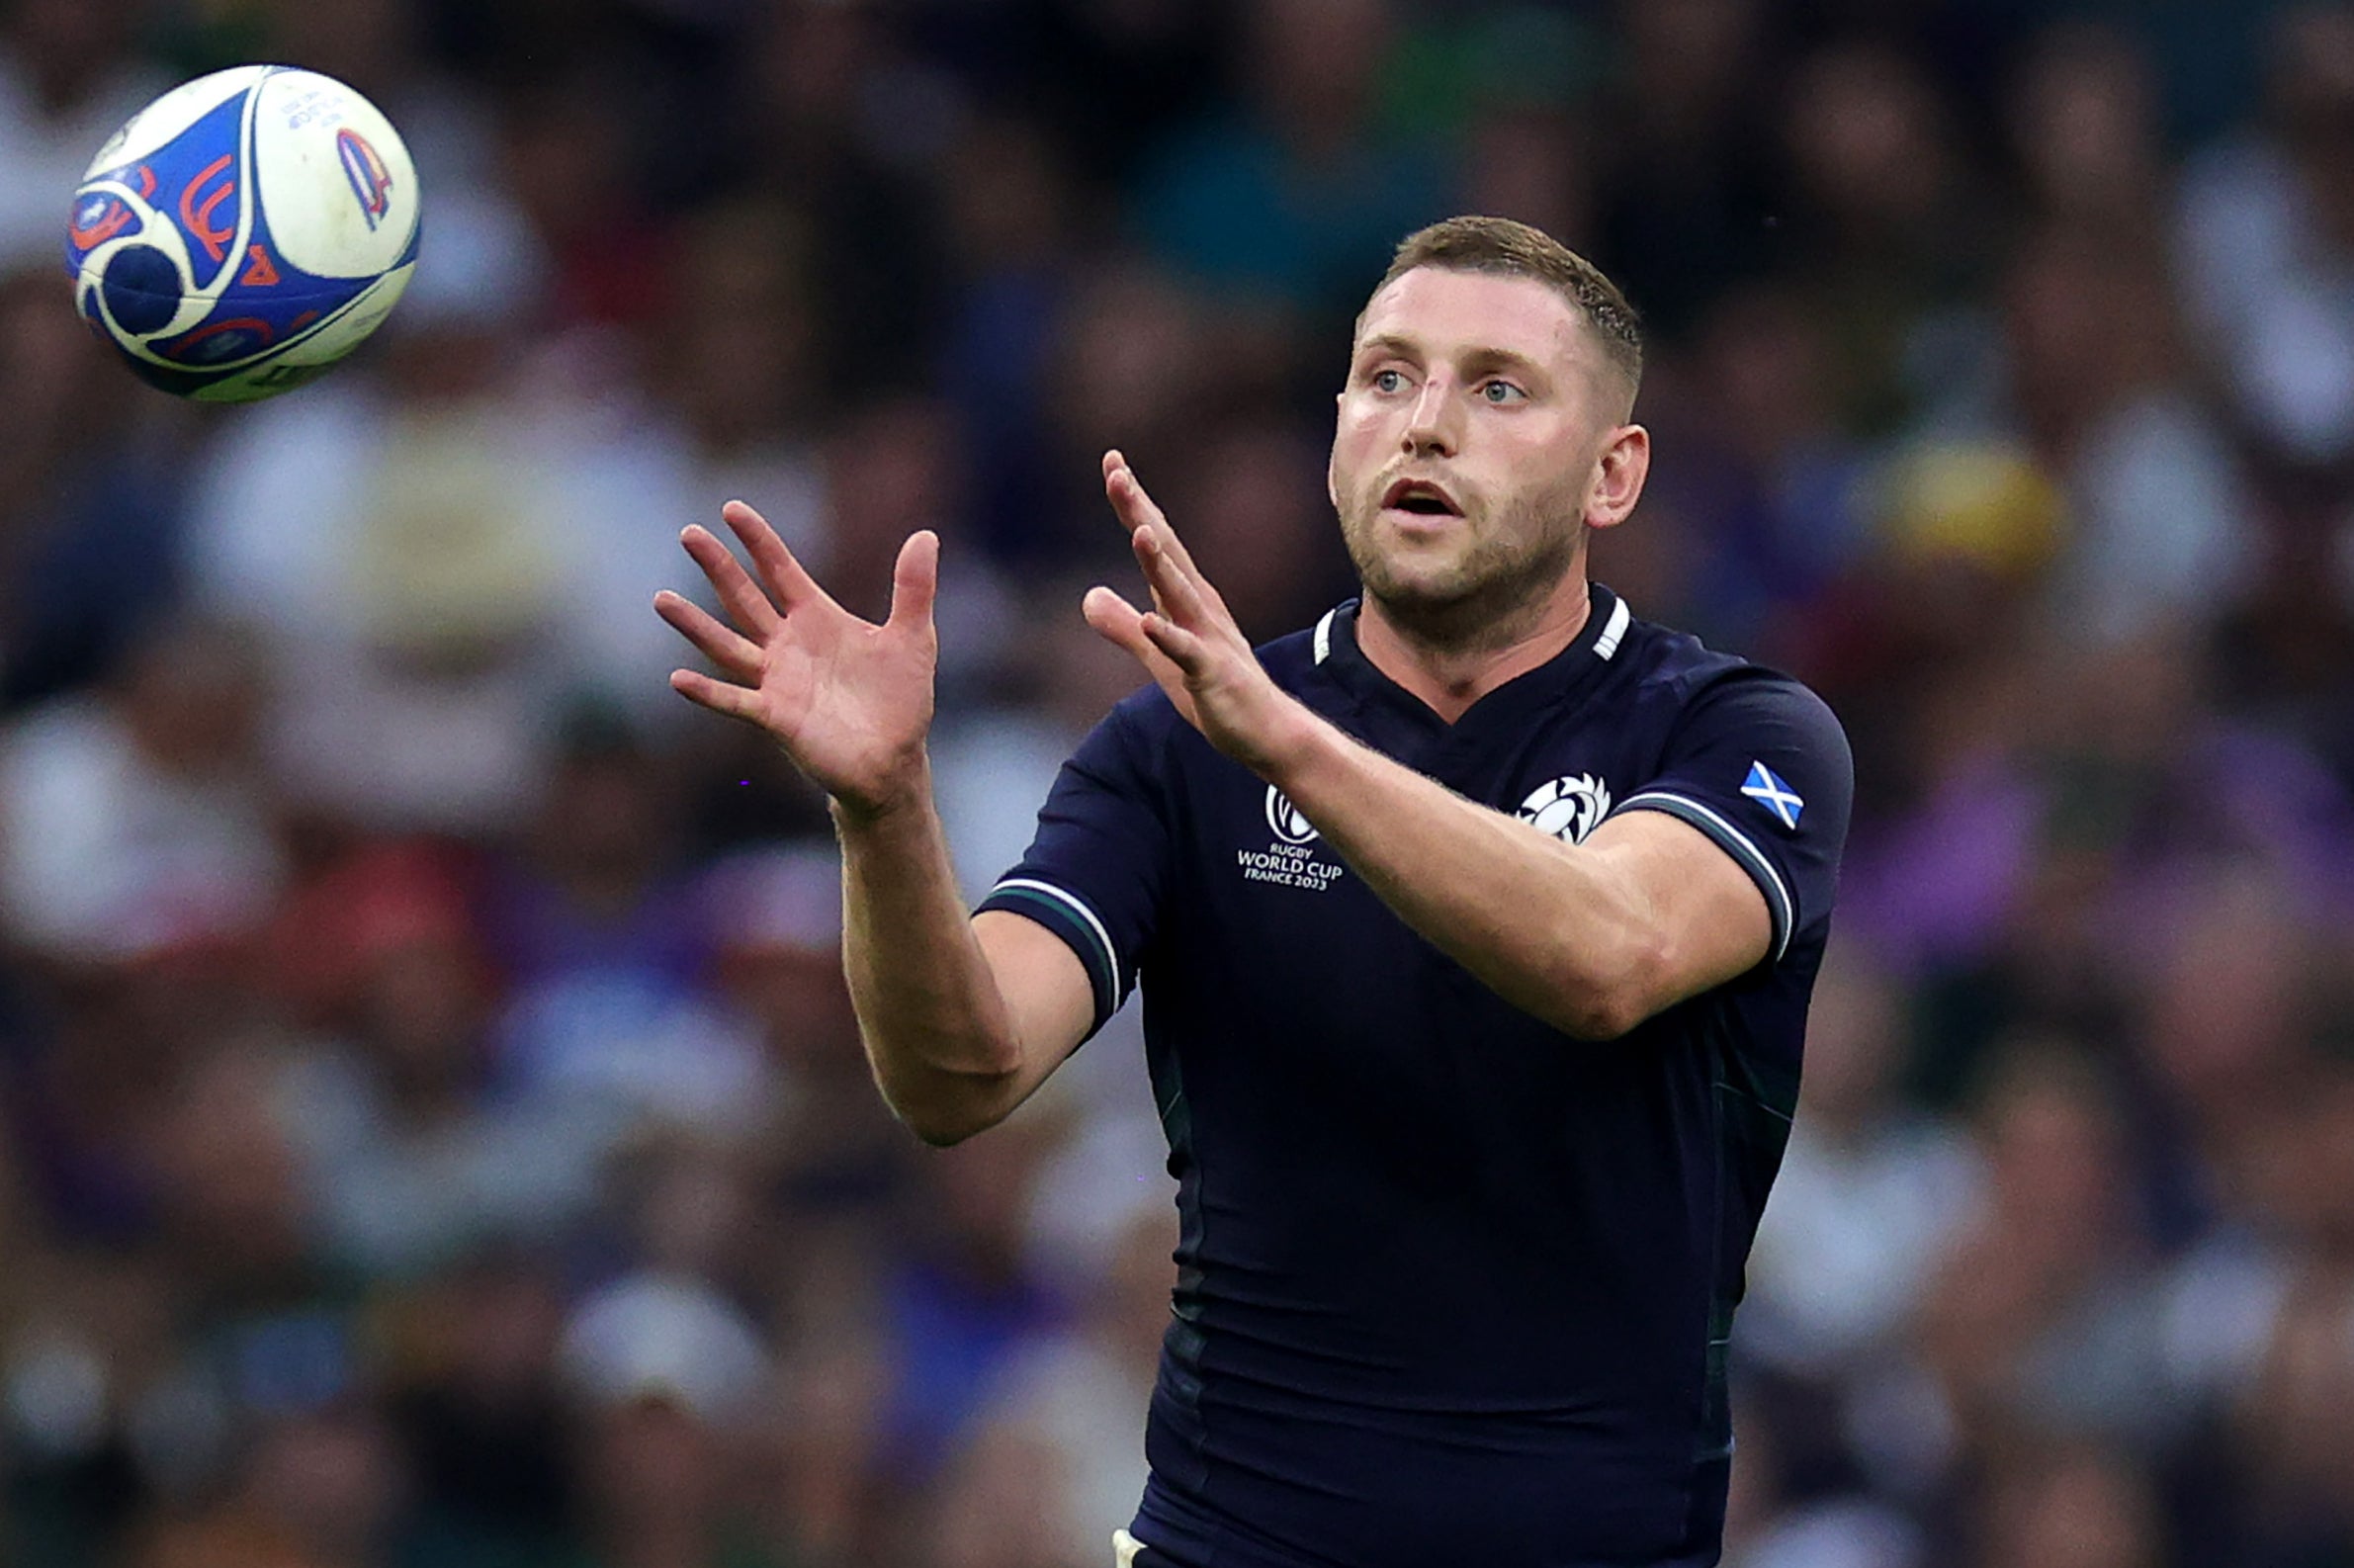 Finn Russell will co-captain Scotland during the Six Nations